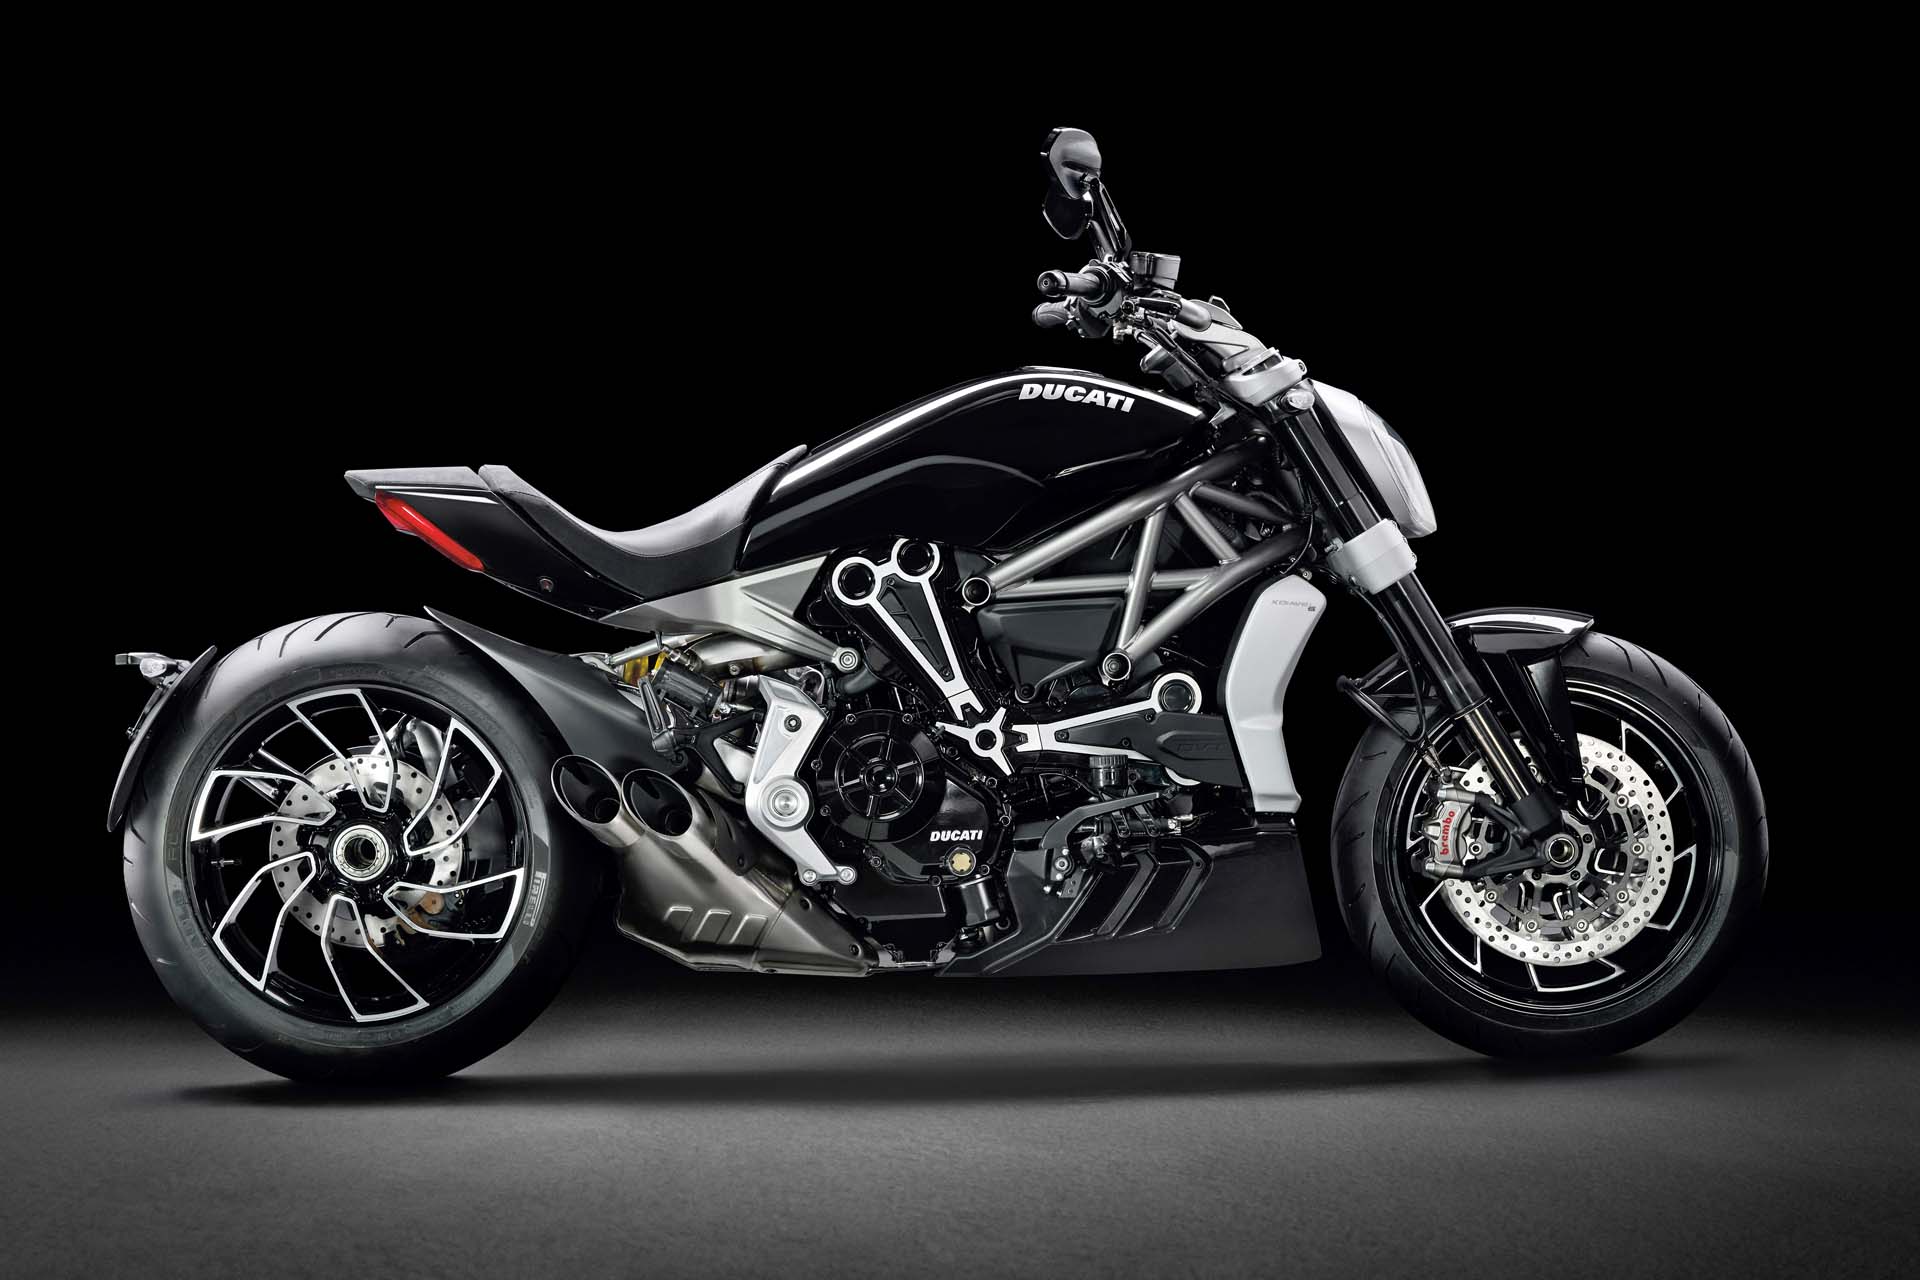 “It will do everything a cruiser won’t,” says Ducati, and if first impressions count for anything the Ducati xDiavel will be a bruiser when it hits showroom floors. The 95 lb-ft, 1,262cc engine is equipped with MotoGP-derived Ducati Power Launch software.